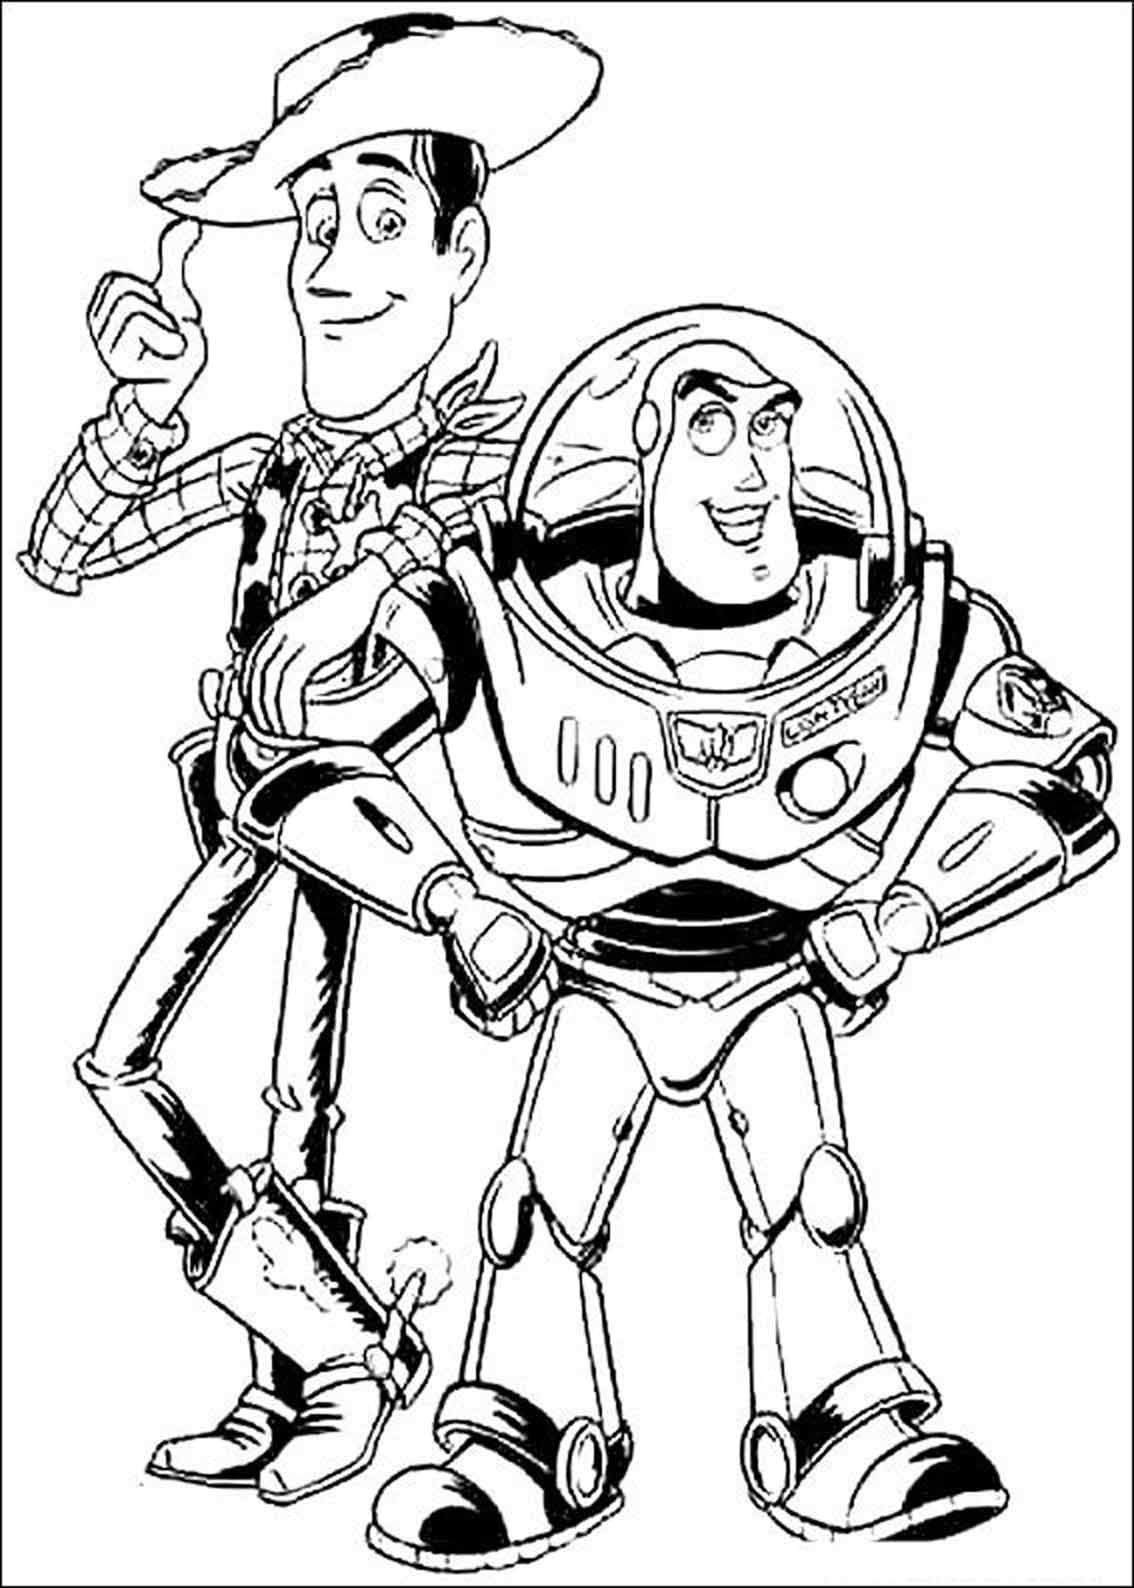 Woody and Buzz Lightyear - Toy Story Kids Coloring Pages